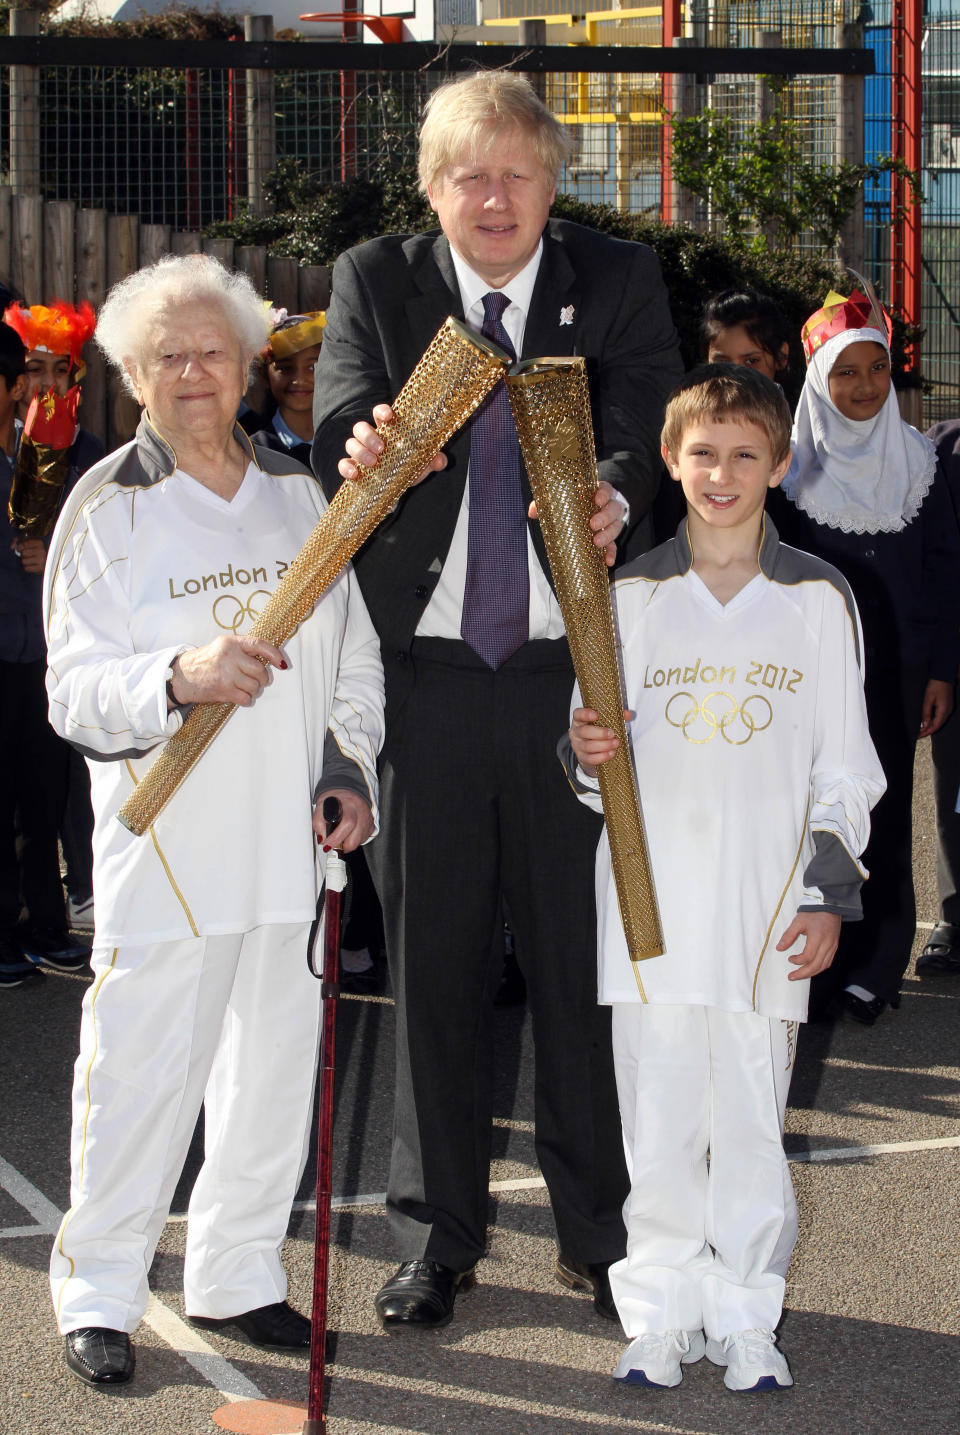 London 2012 Olympic Torchbearer's Dinah Gould aged 99 (left) and Dominic John MacGowan aged 11 (right) with London Mayor Boris Johnson during a photocall at Redlands Primary School, London.